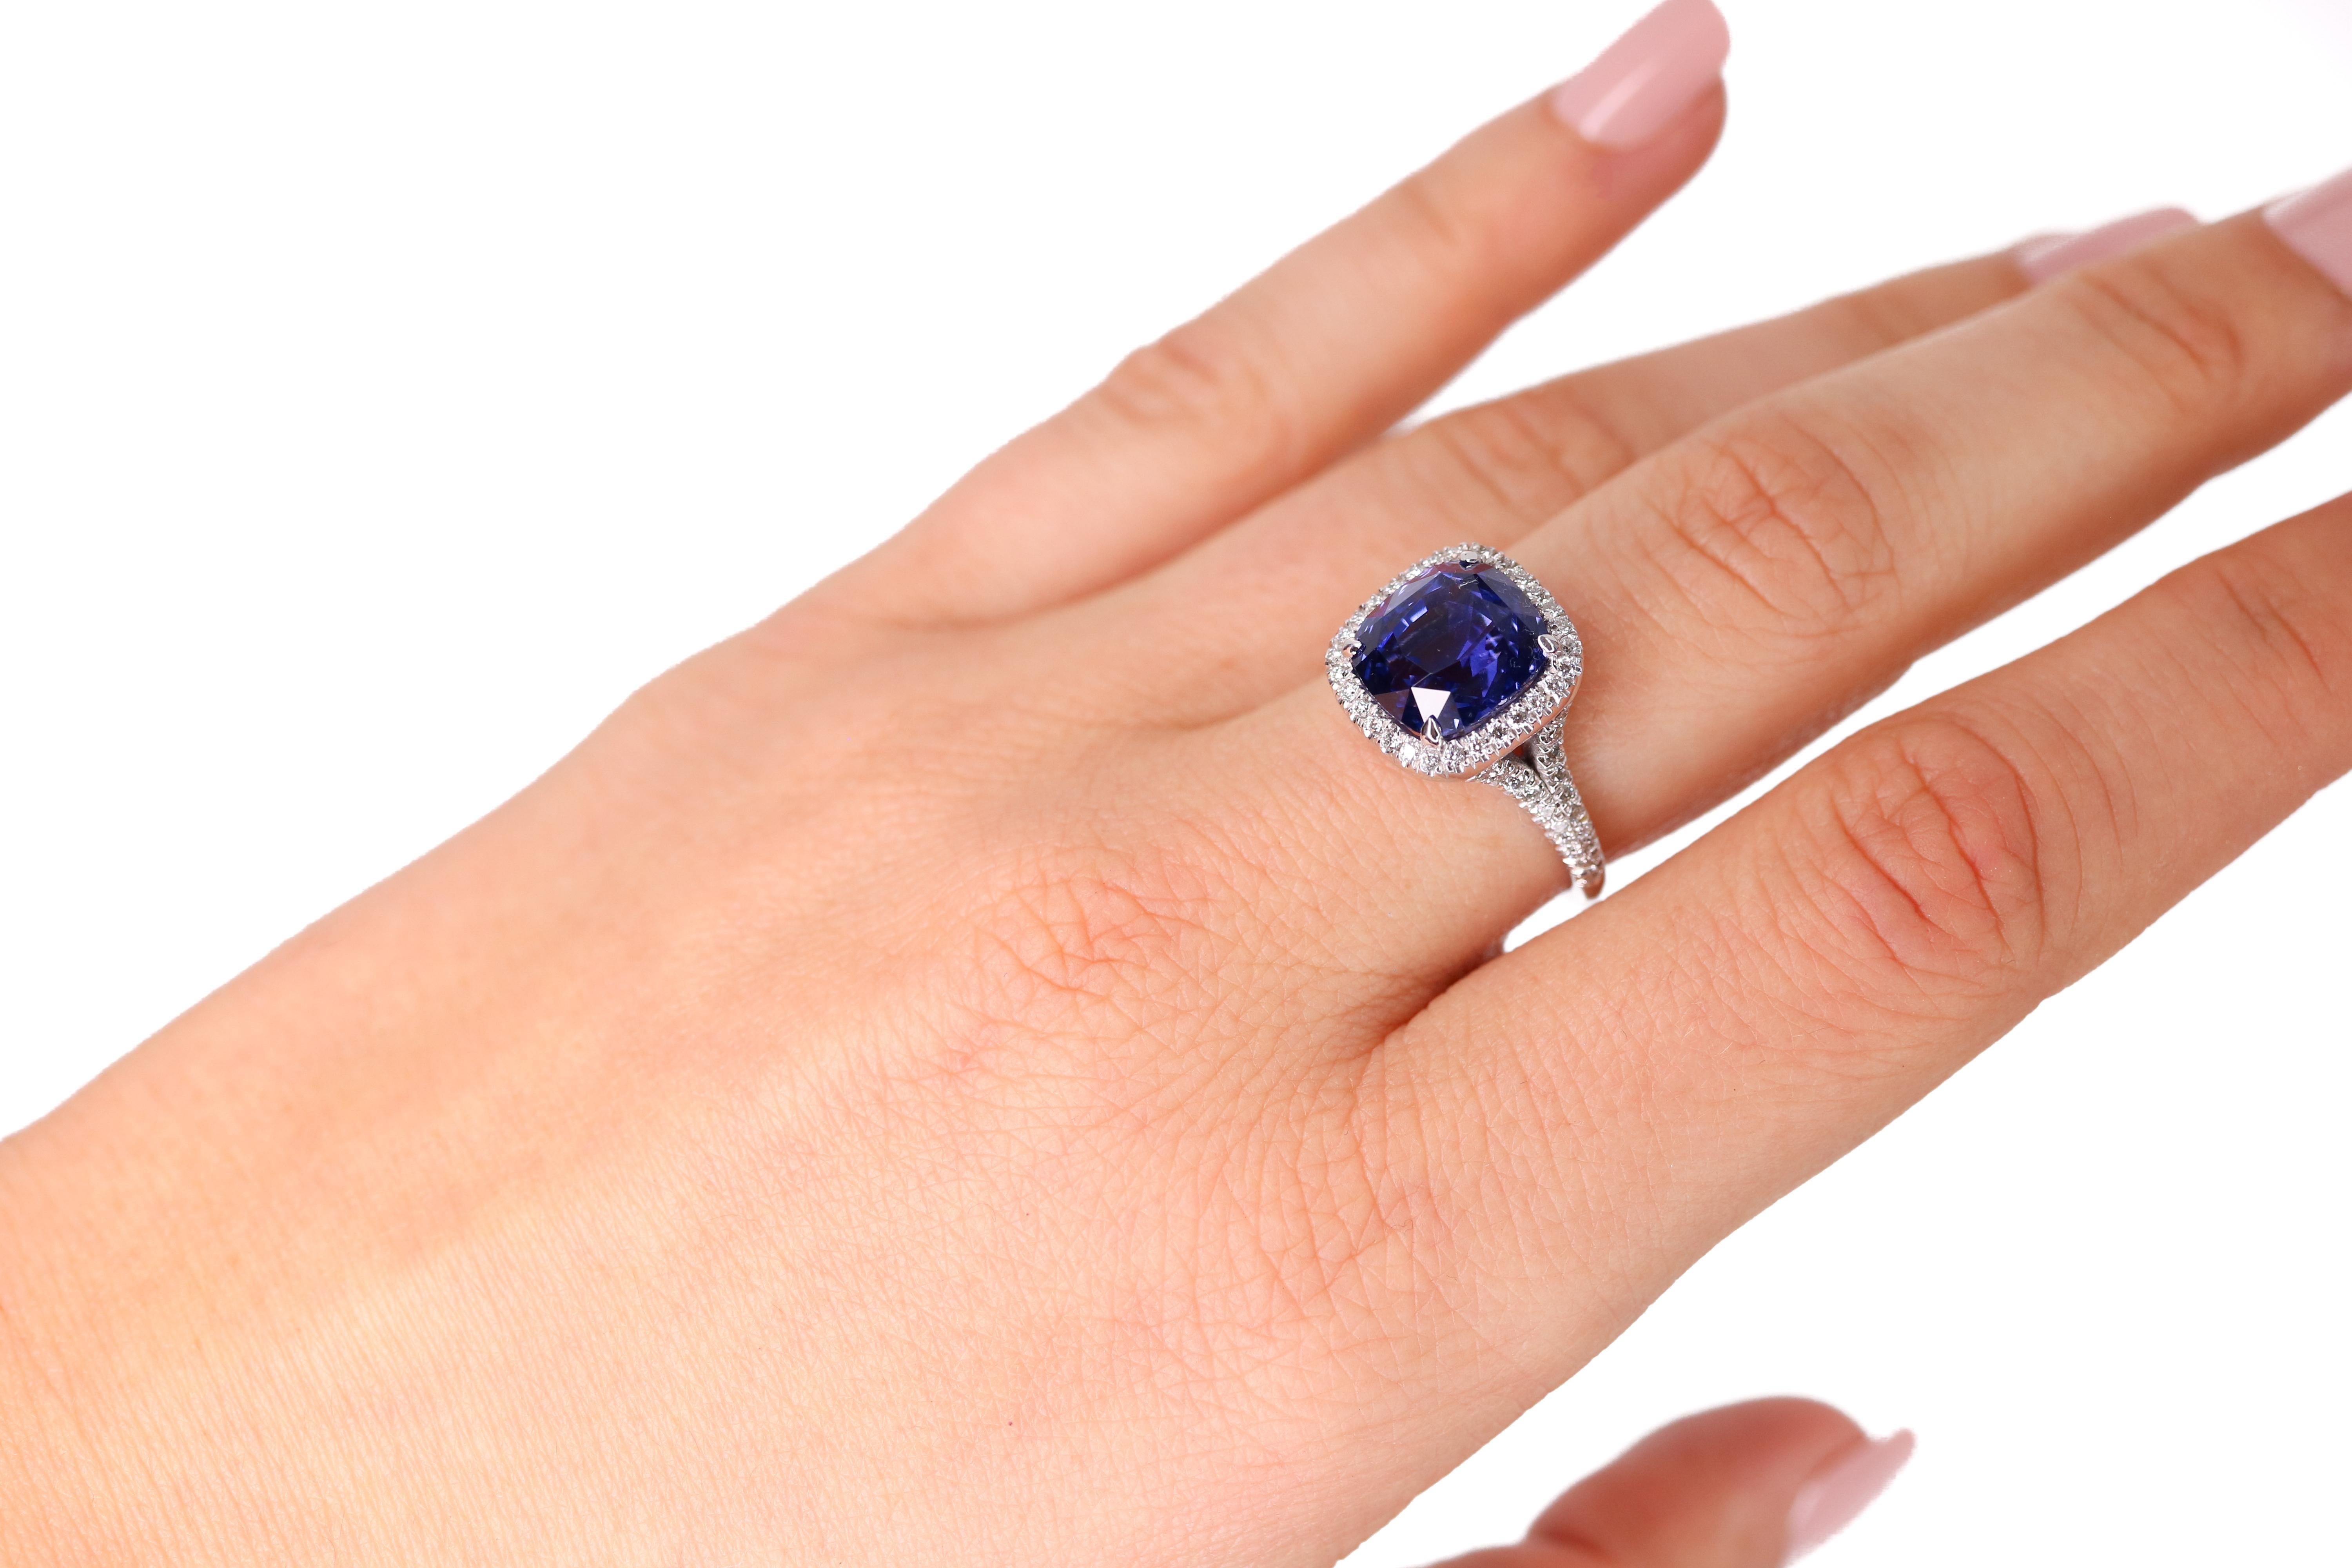 This 6.56ct Cushion Violet Blue Sapphire Gem is set in a Platinum ring with a halo of 0.46 carat total weight diamonds.

This Sapphire is GIA certified #2173186881